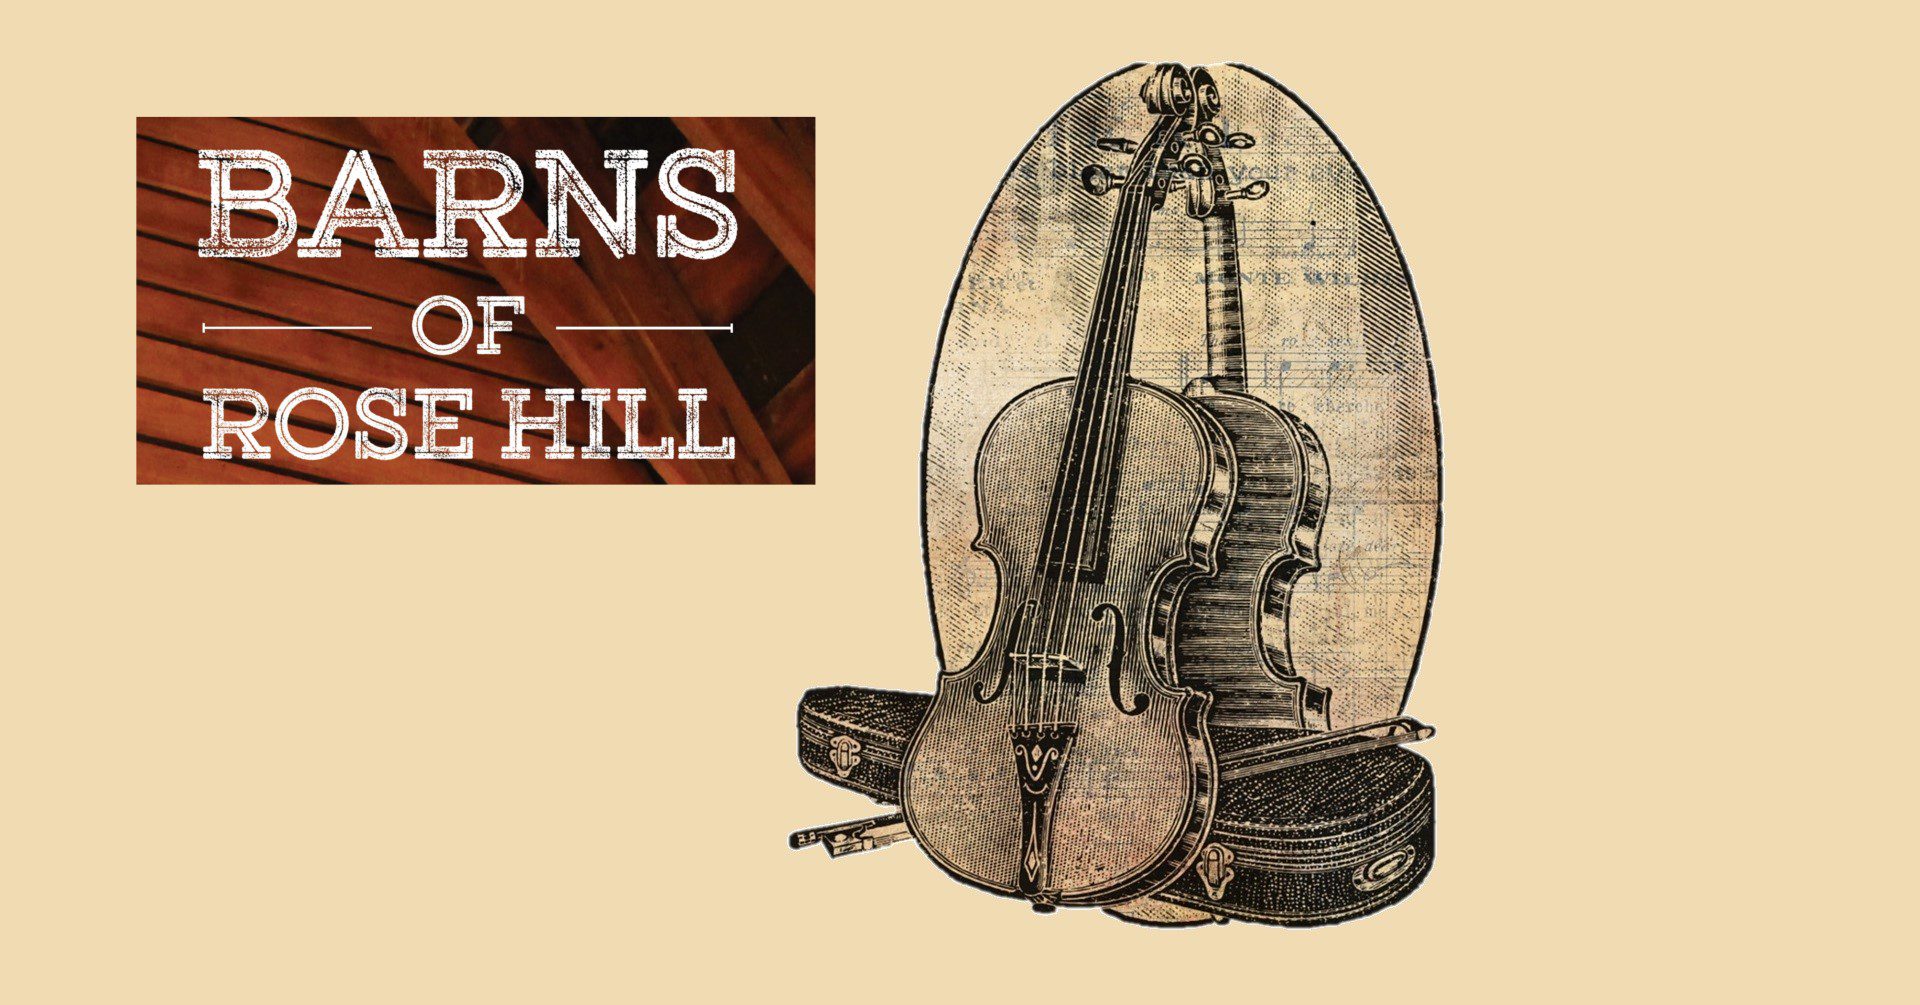 Barns of Rose Hill Chamber Orchestra Presents: Vivaldi’s Four Seasons & Piazzolla’s Four Seasons